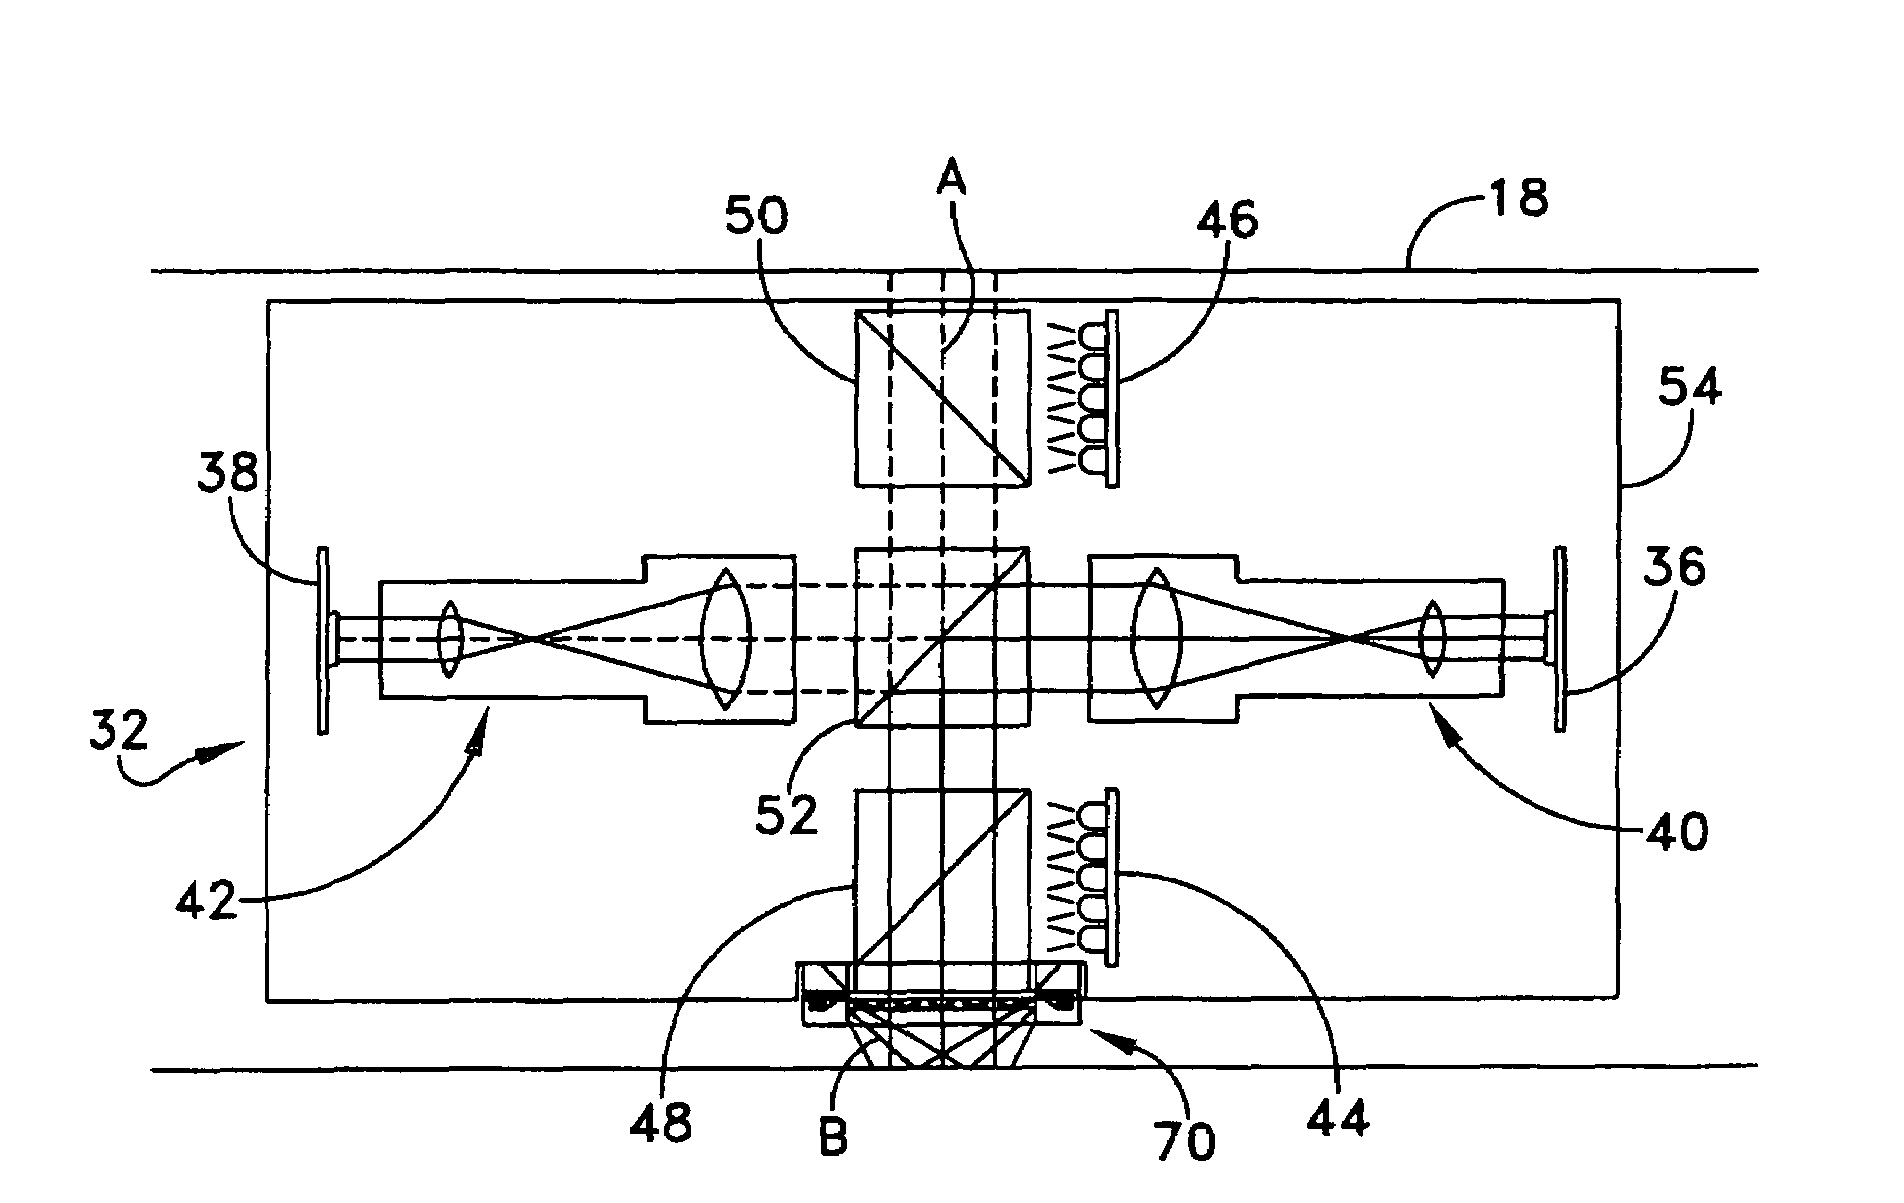 Off-axis illumination assembly and method